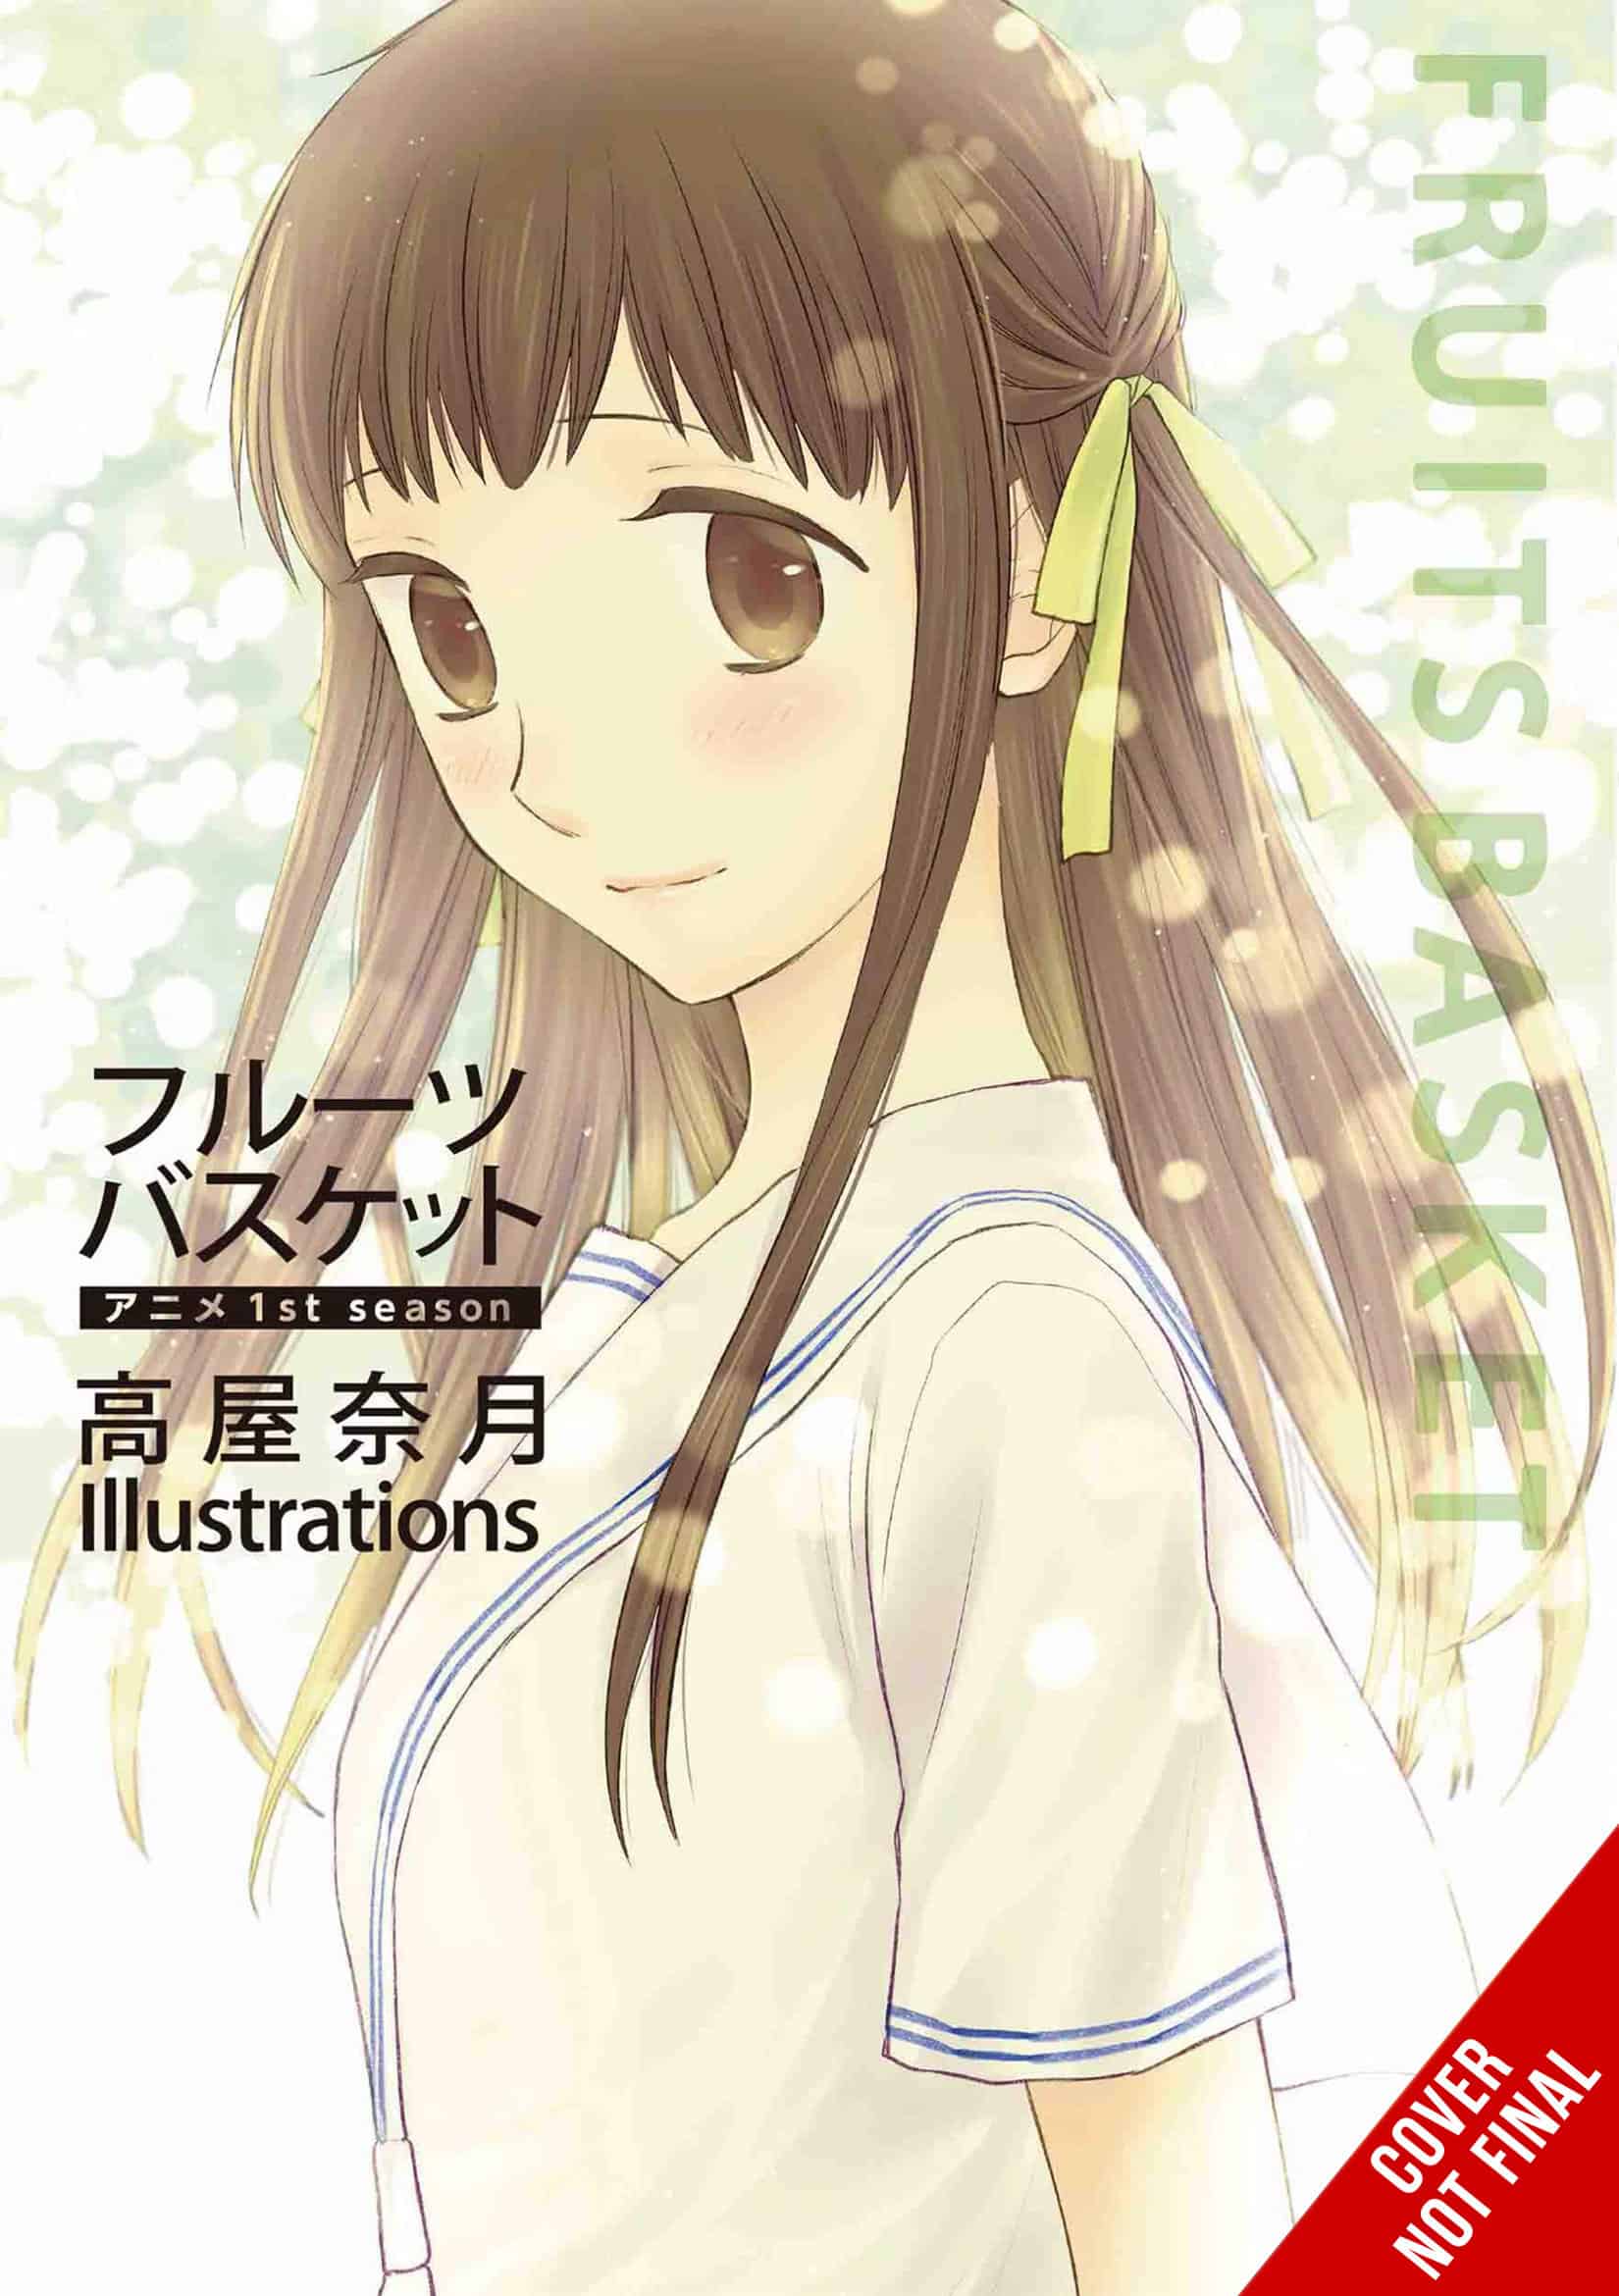 Fruits Basket announces new project for October